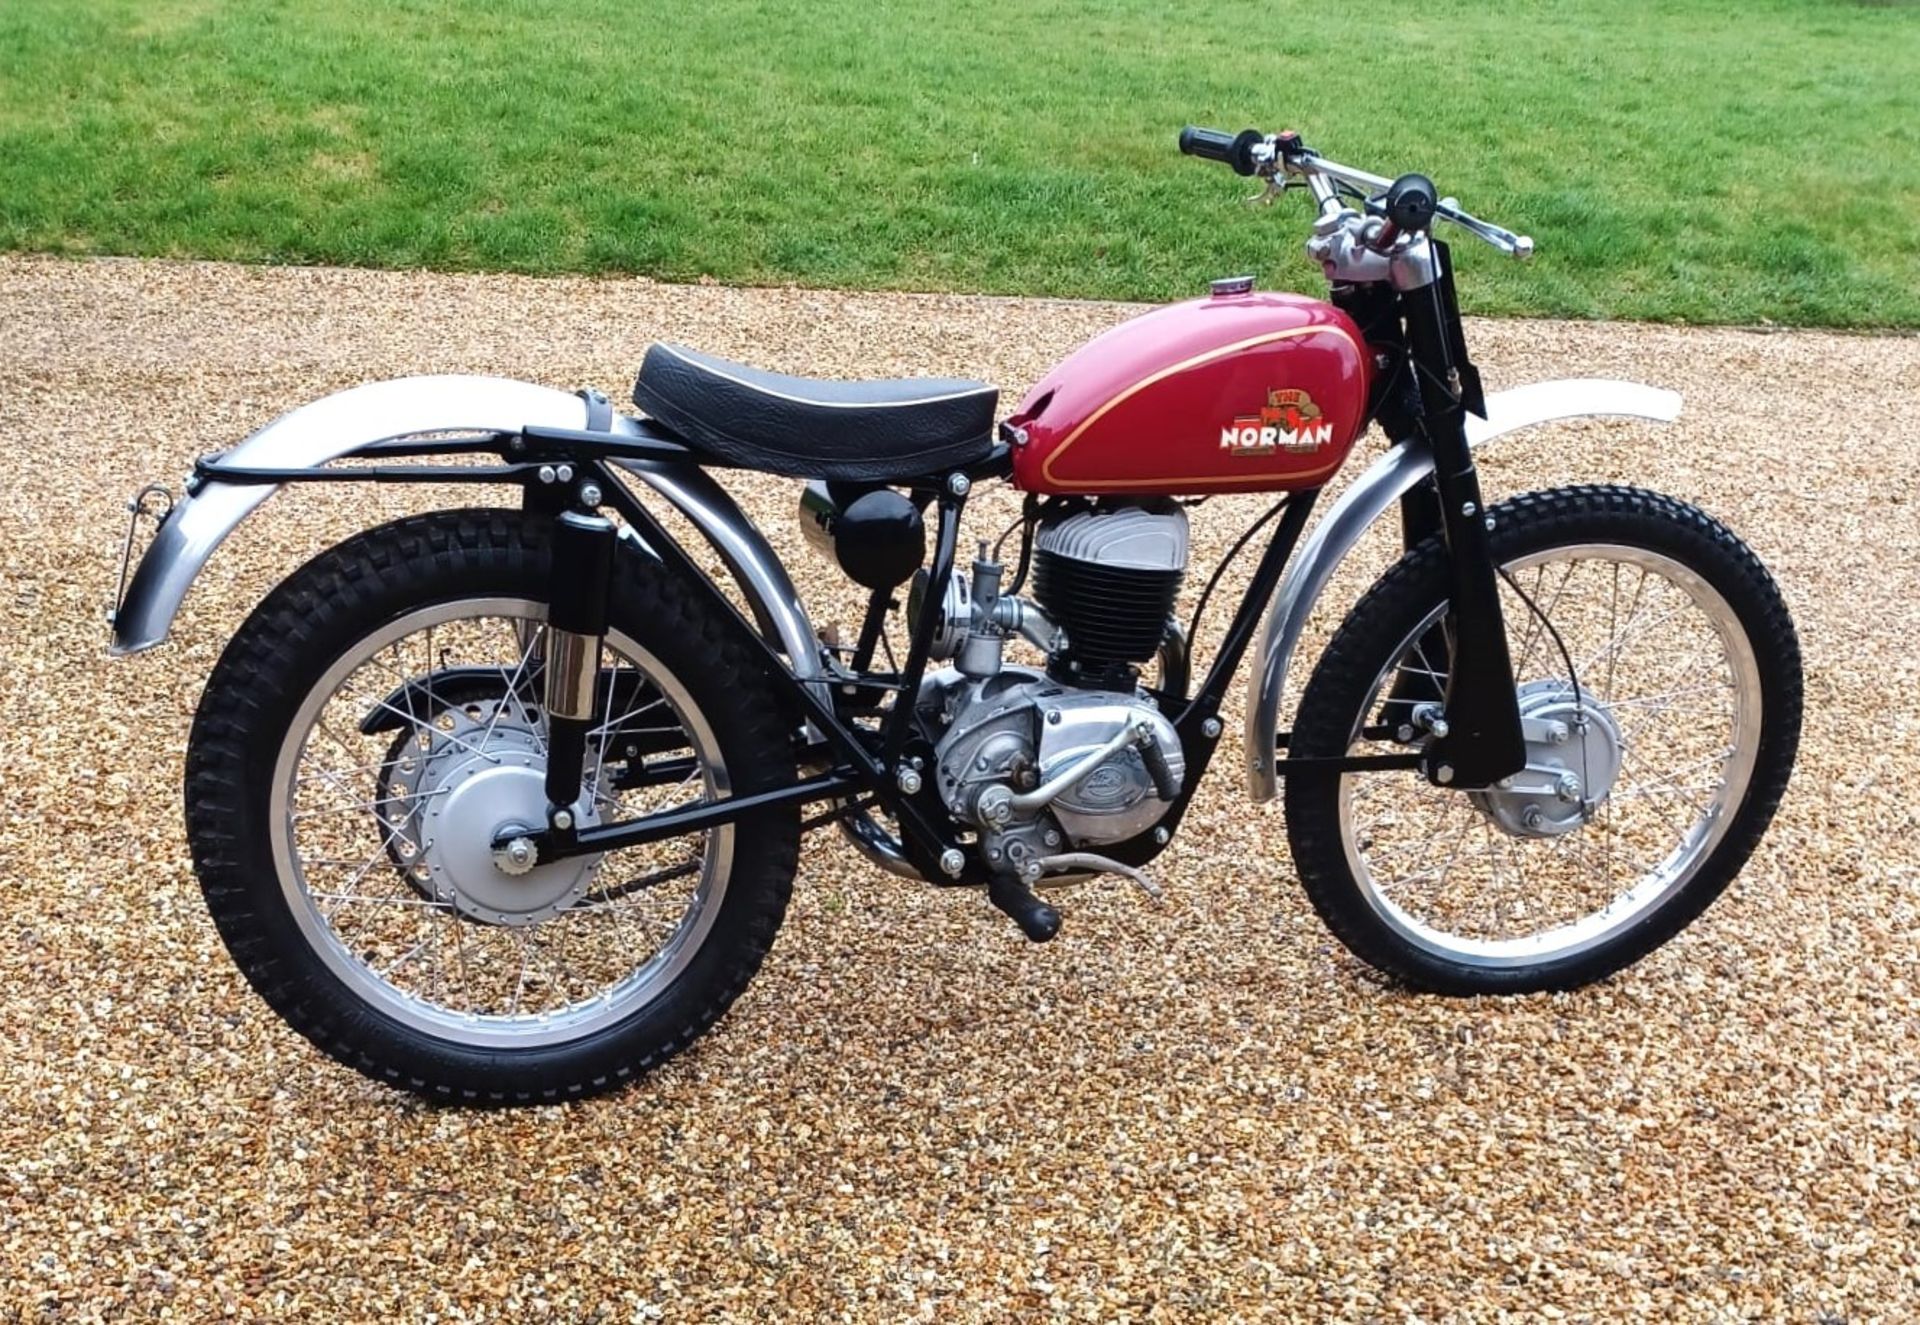 1961 NORMAN TRIALS Registration Number: 956 UYY Frame Number: TBA Recorded Mileage: 18 miles - Nut